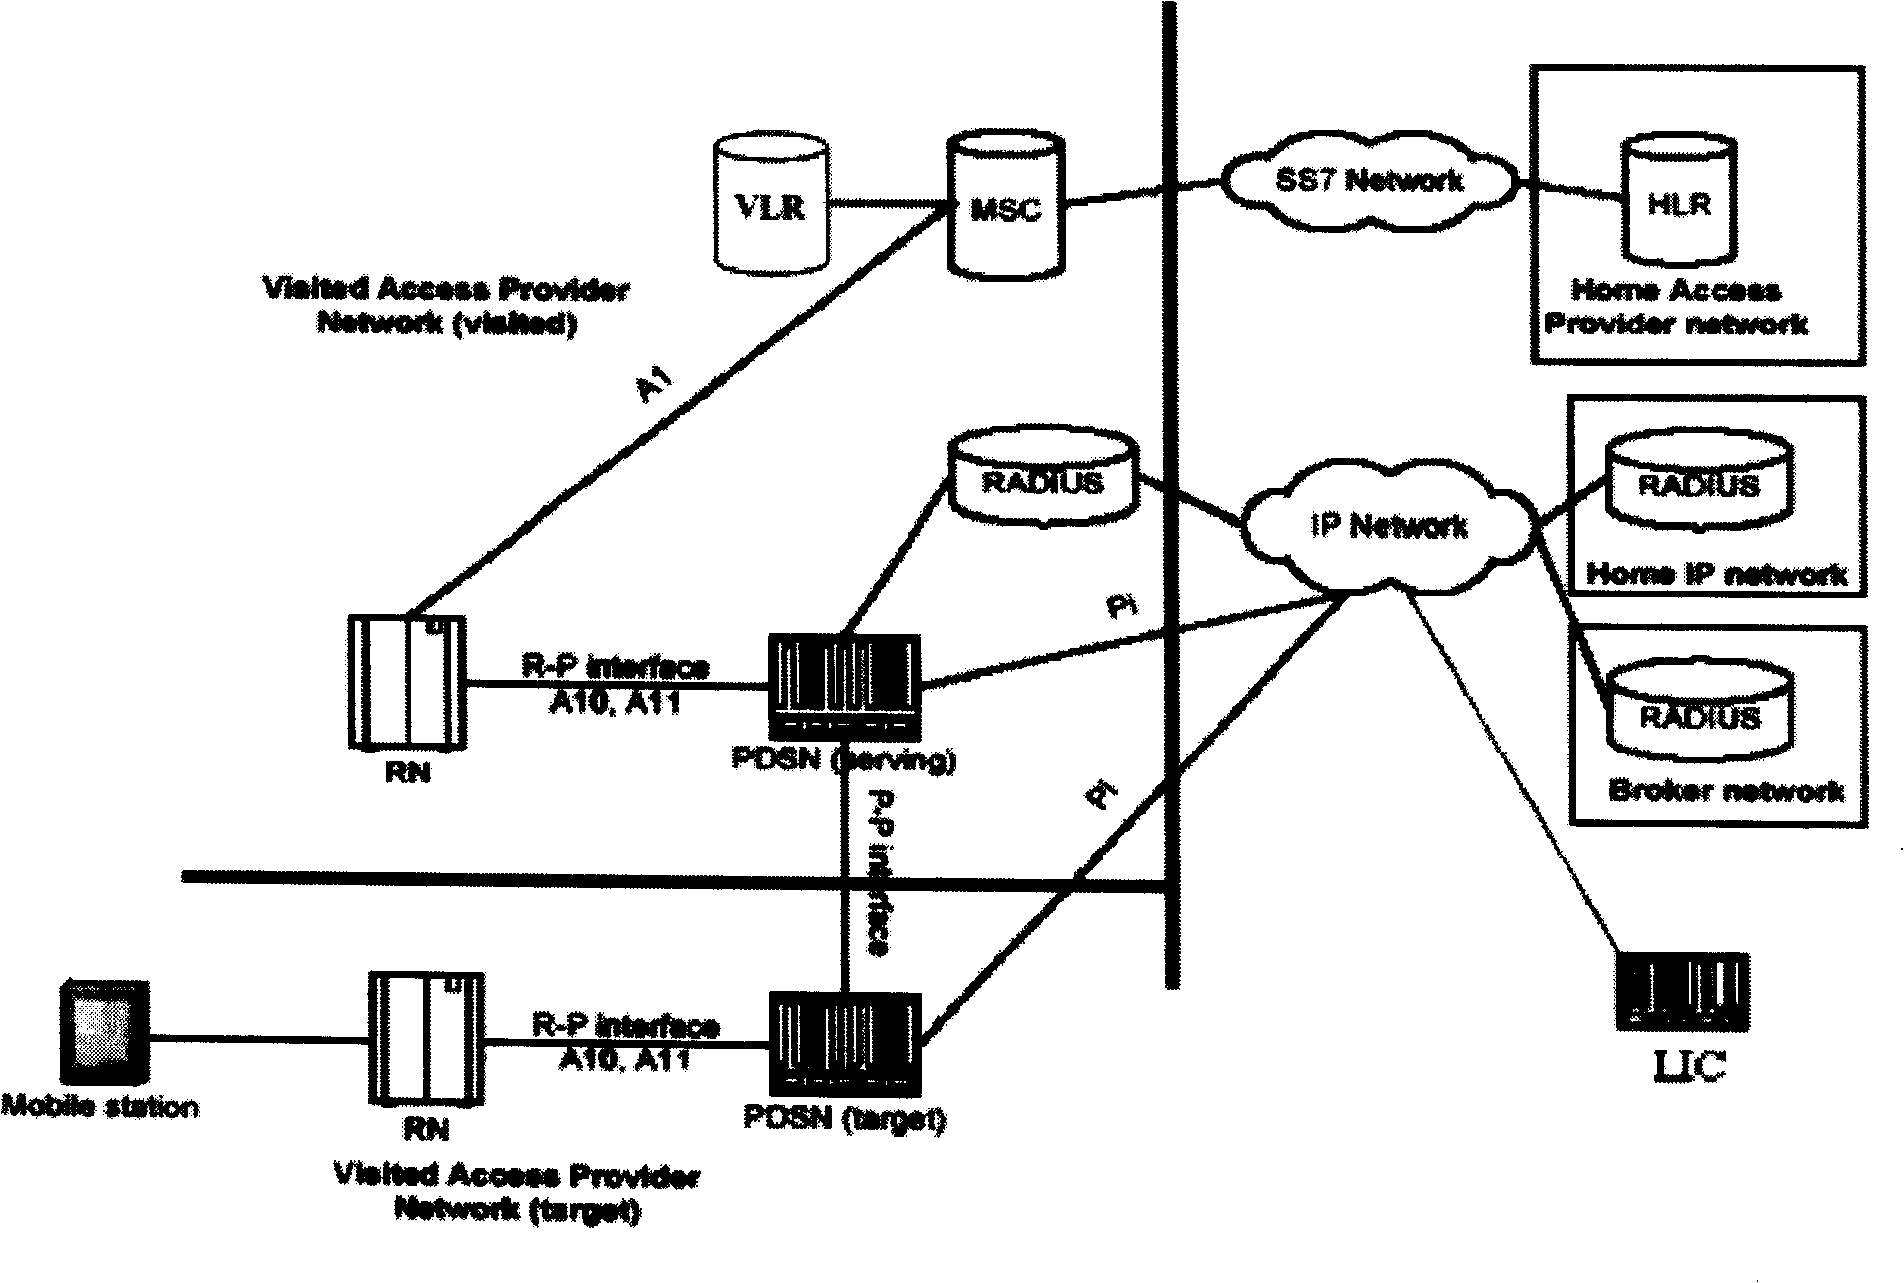 Method for monitoring data traffic based on contents and/or IP address